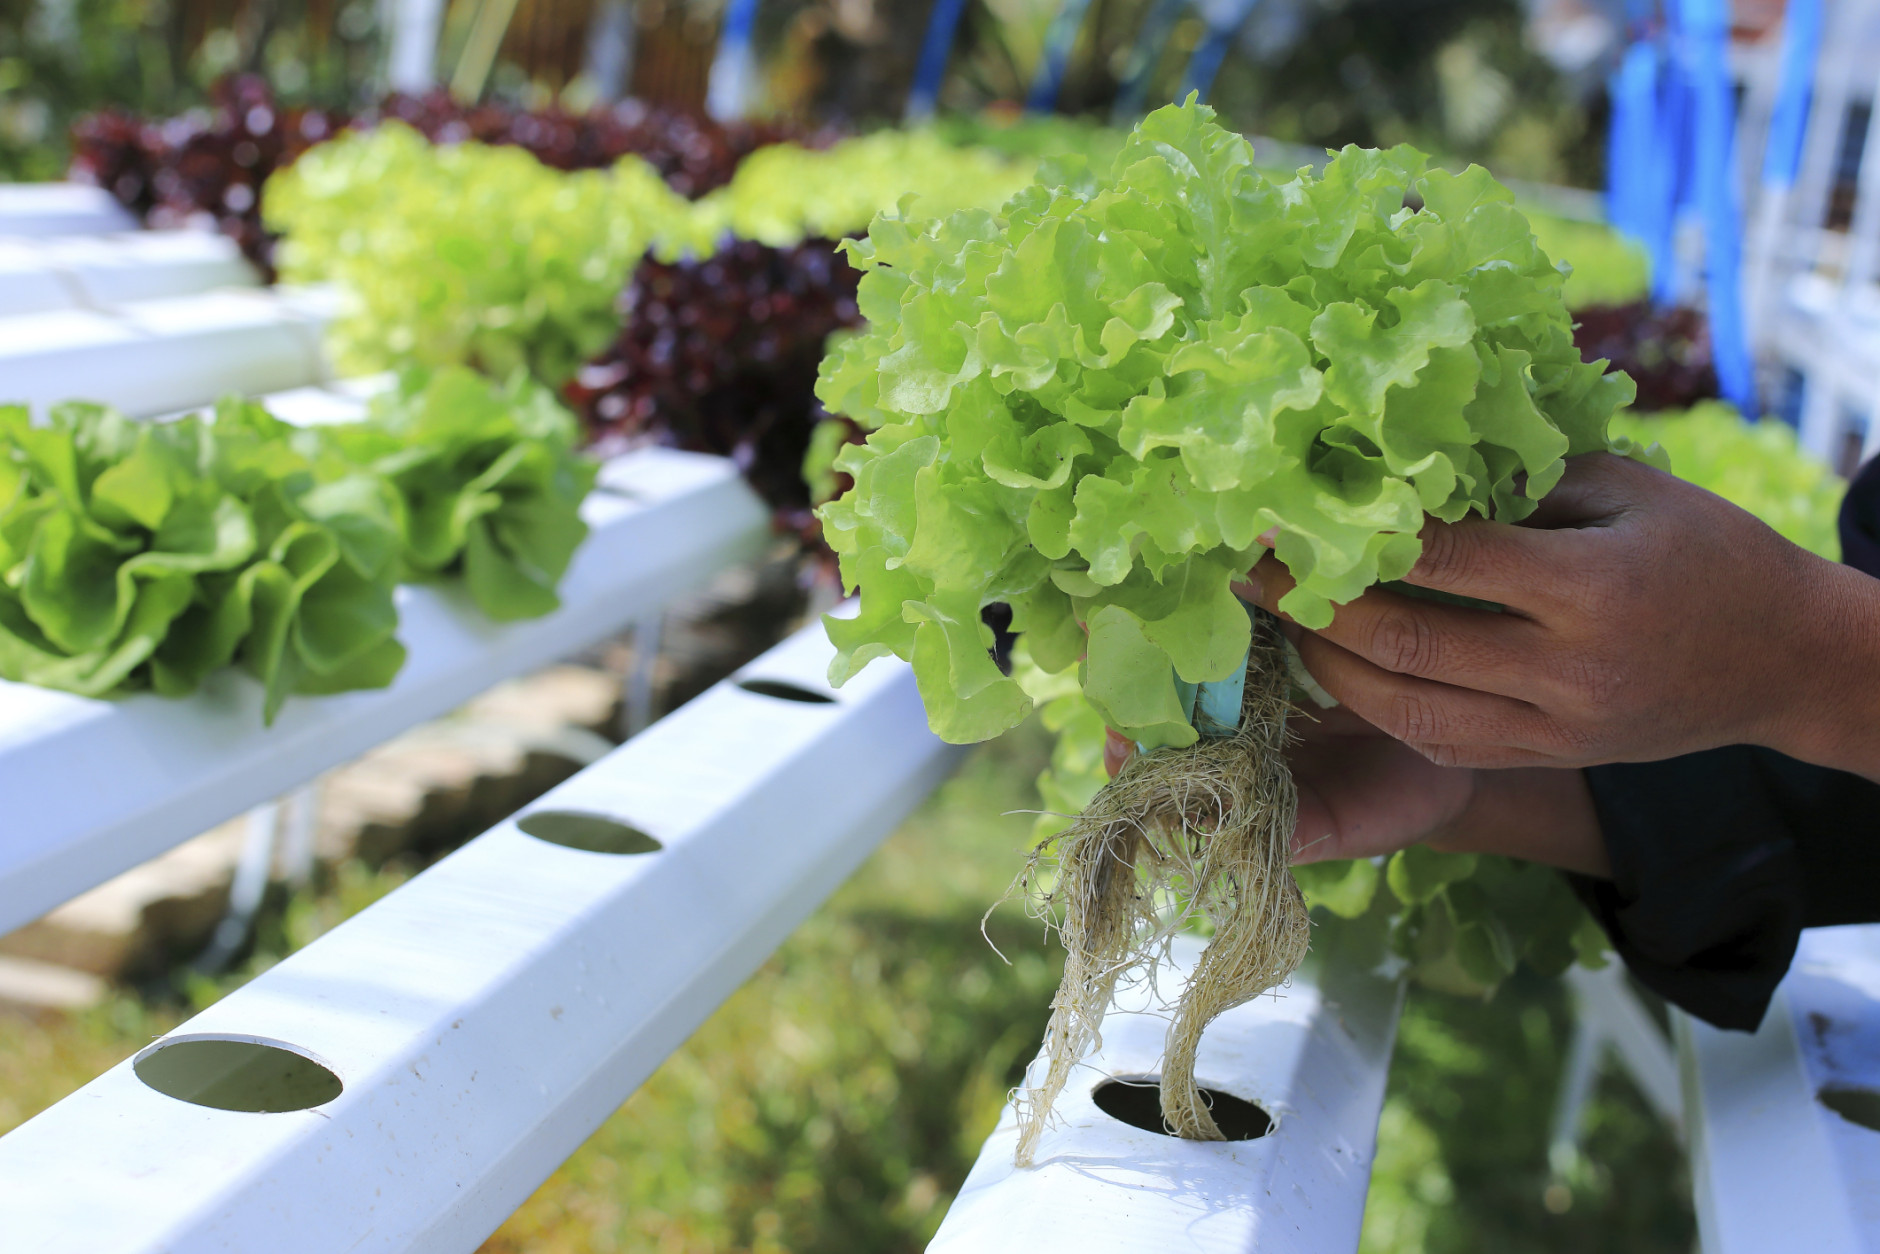 Local Roots Farms is growing hydroponic lettuce in its shipping container farm. Soon, the business hopes to grow more fruits and vegetables and break into the D.C. market. (Thinkstock)